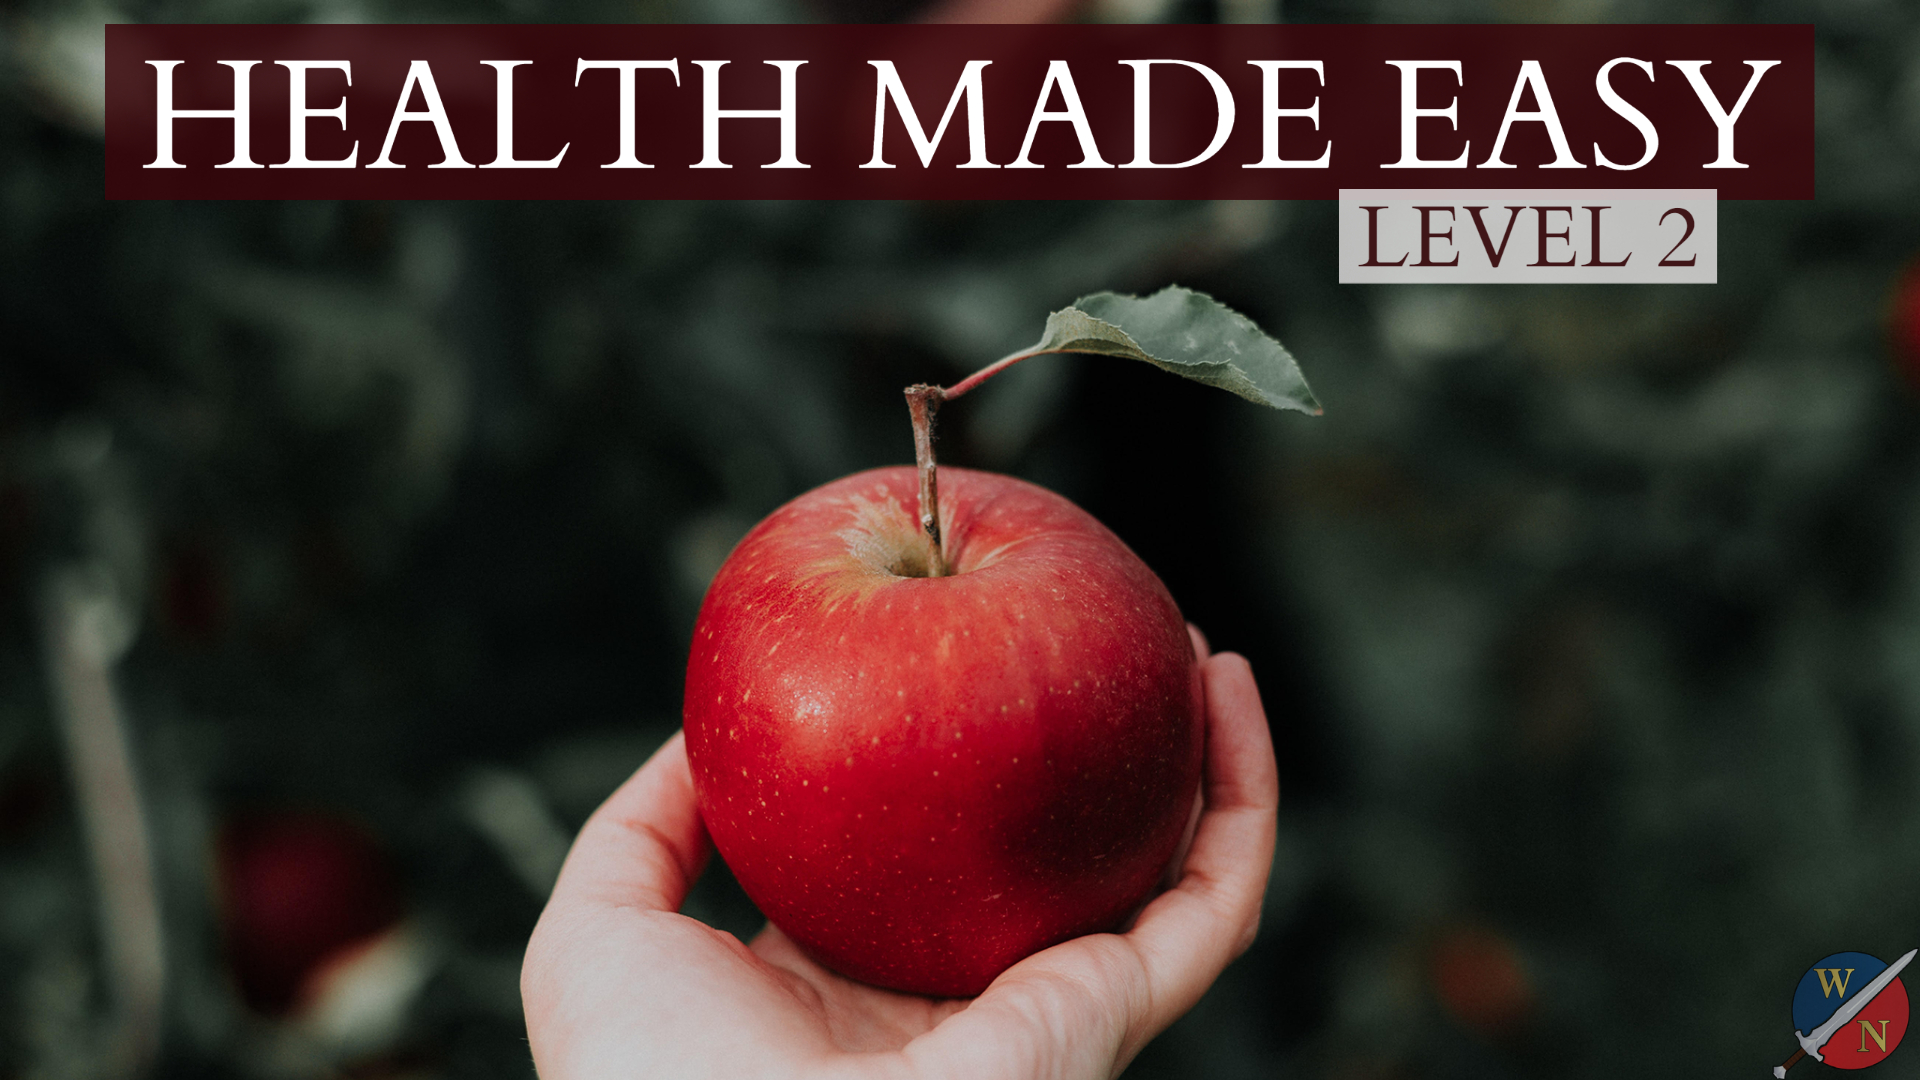 Health Made Easy with Dr. Kevin Zadai - Level 2 course image